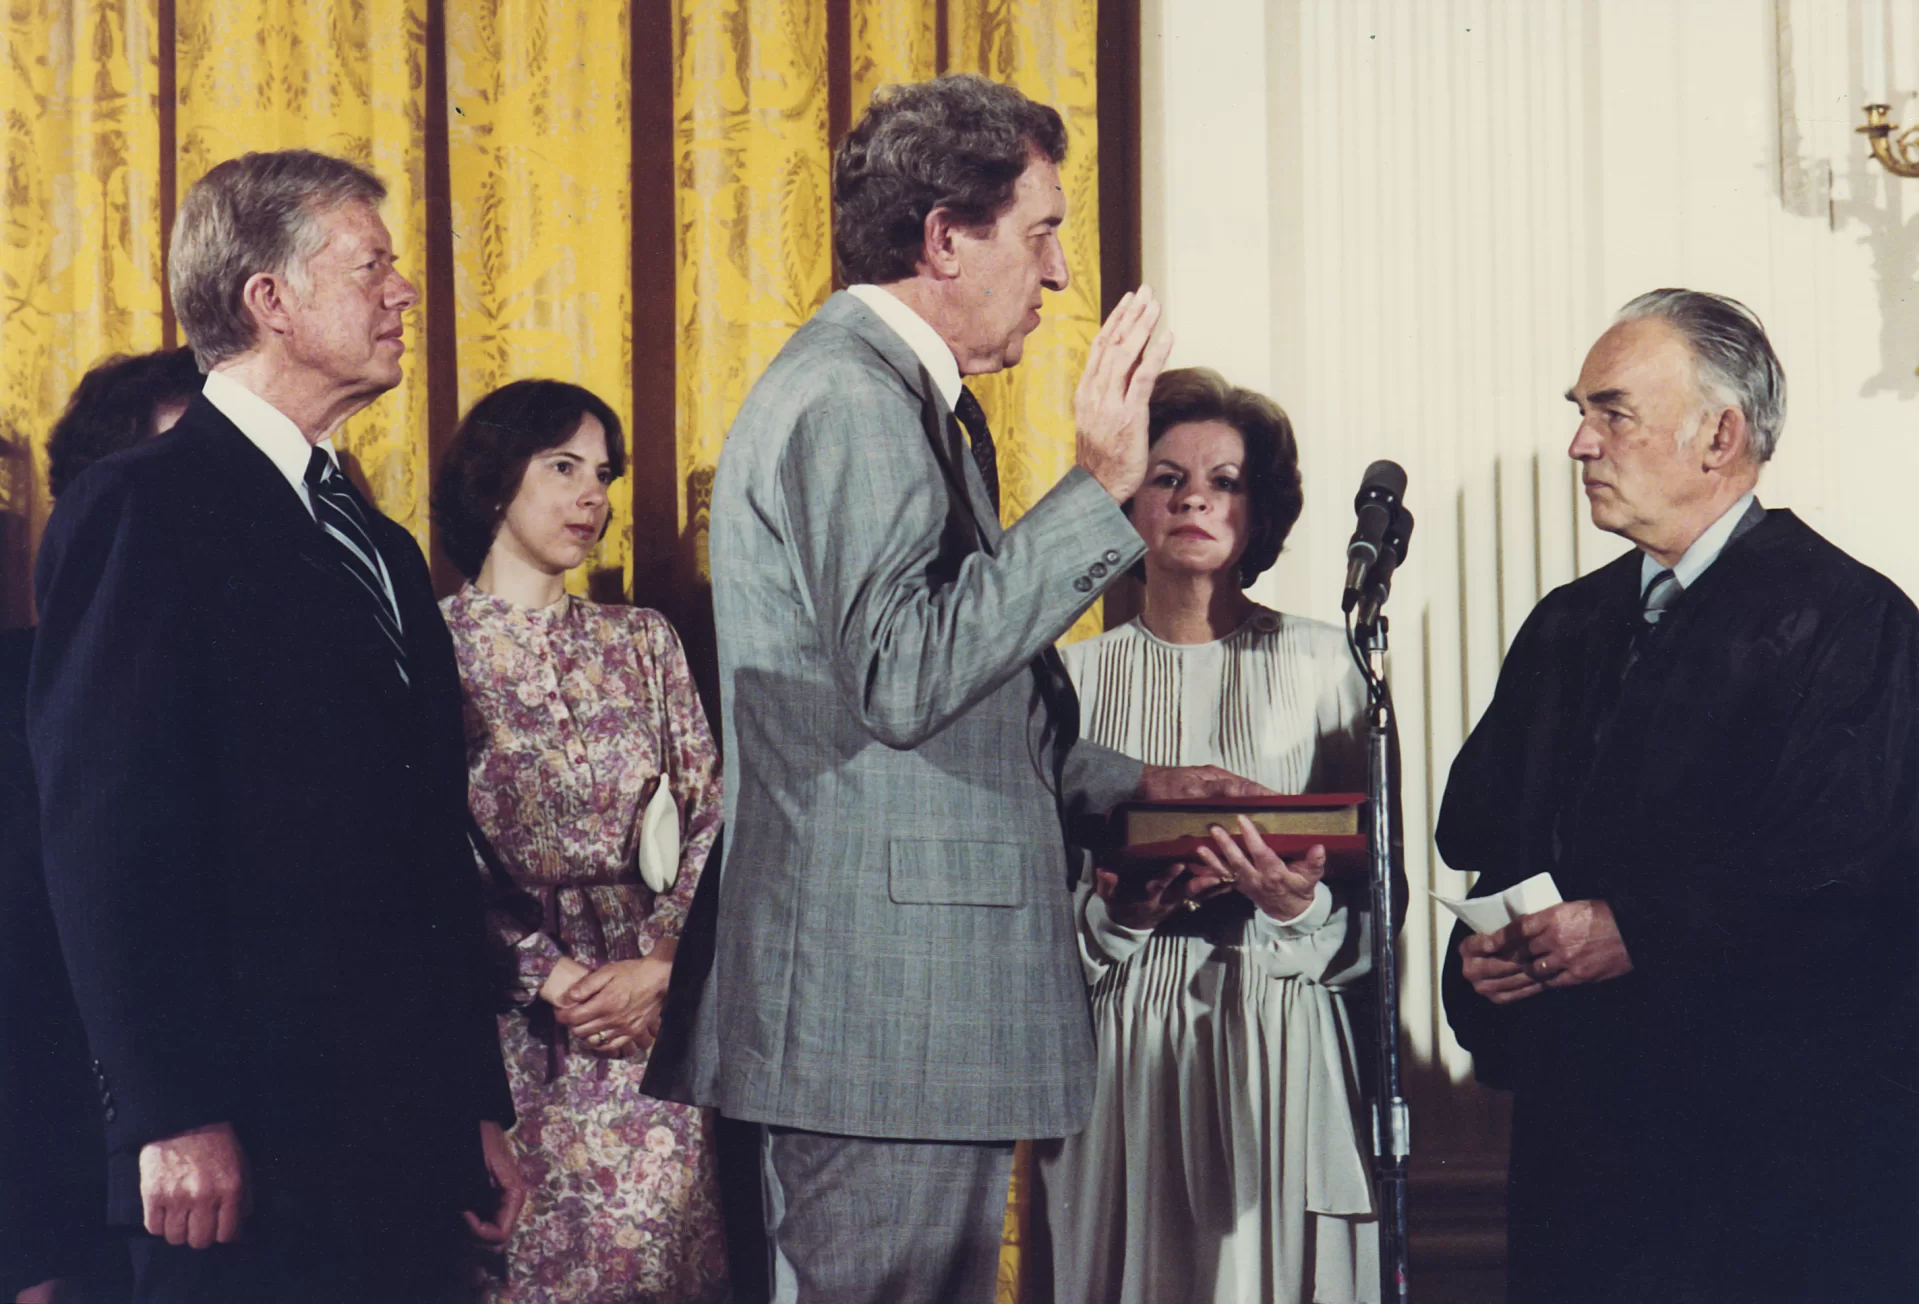 Edmund S. Muskie '36 is inaugurated as President Jimmy Carter's Secretary of State on May 8, 1980. From left: President Carter, Ellen Muskie Allen (daughter), Muskie, Jane Muskie (wife), Judge Frank Coffin, Bates Class of 1940. Photo by Fitzpatrick, Bill, The White House